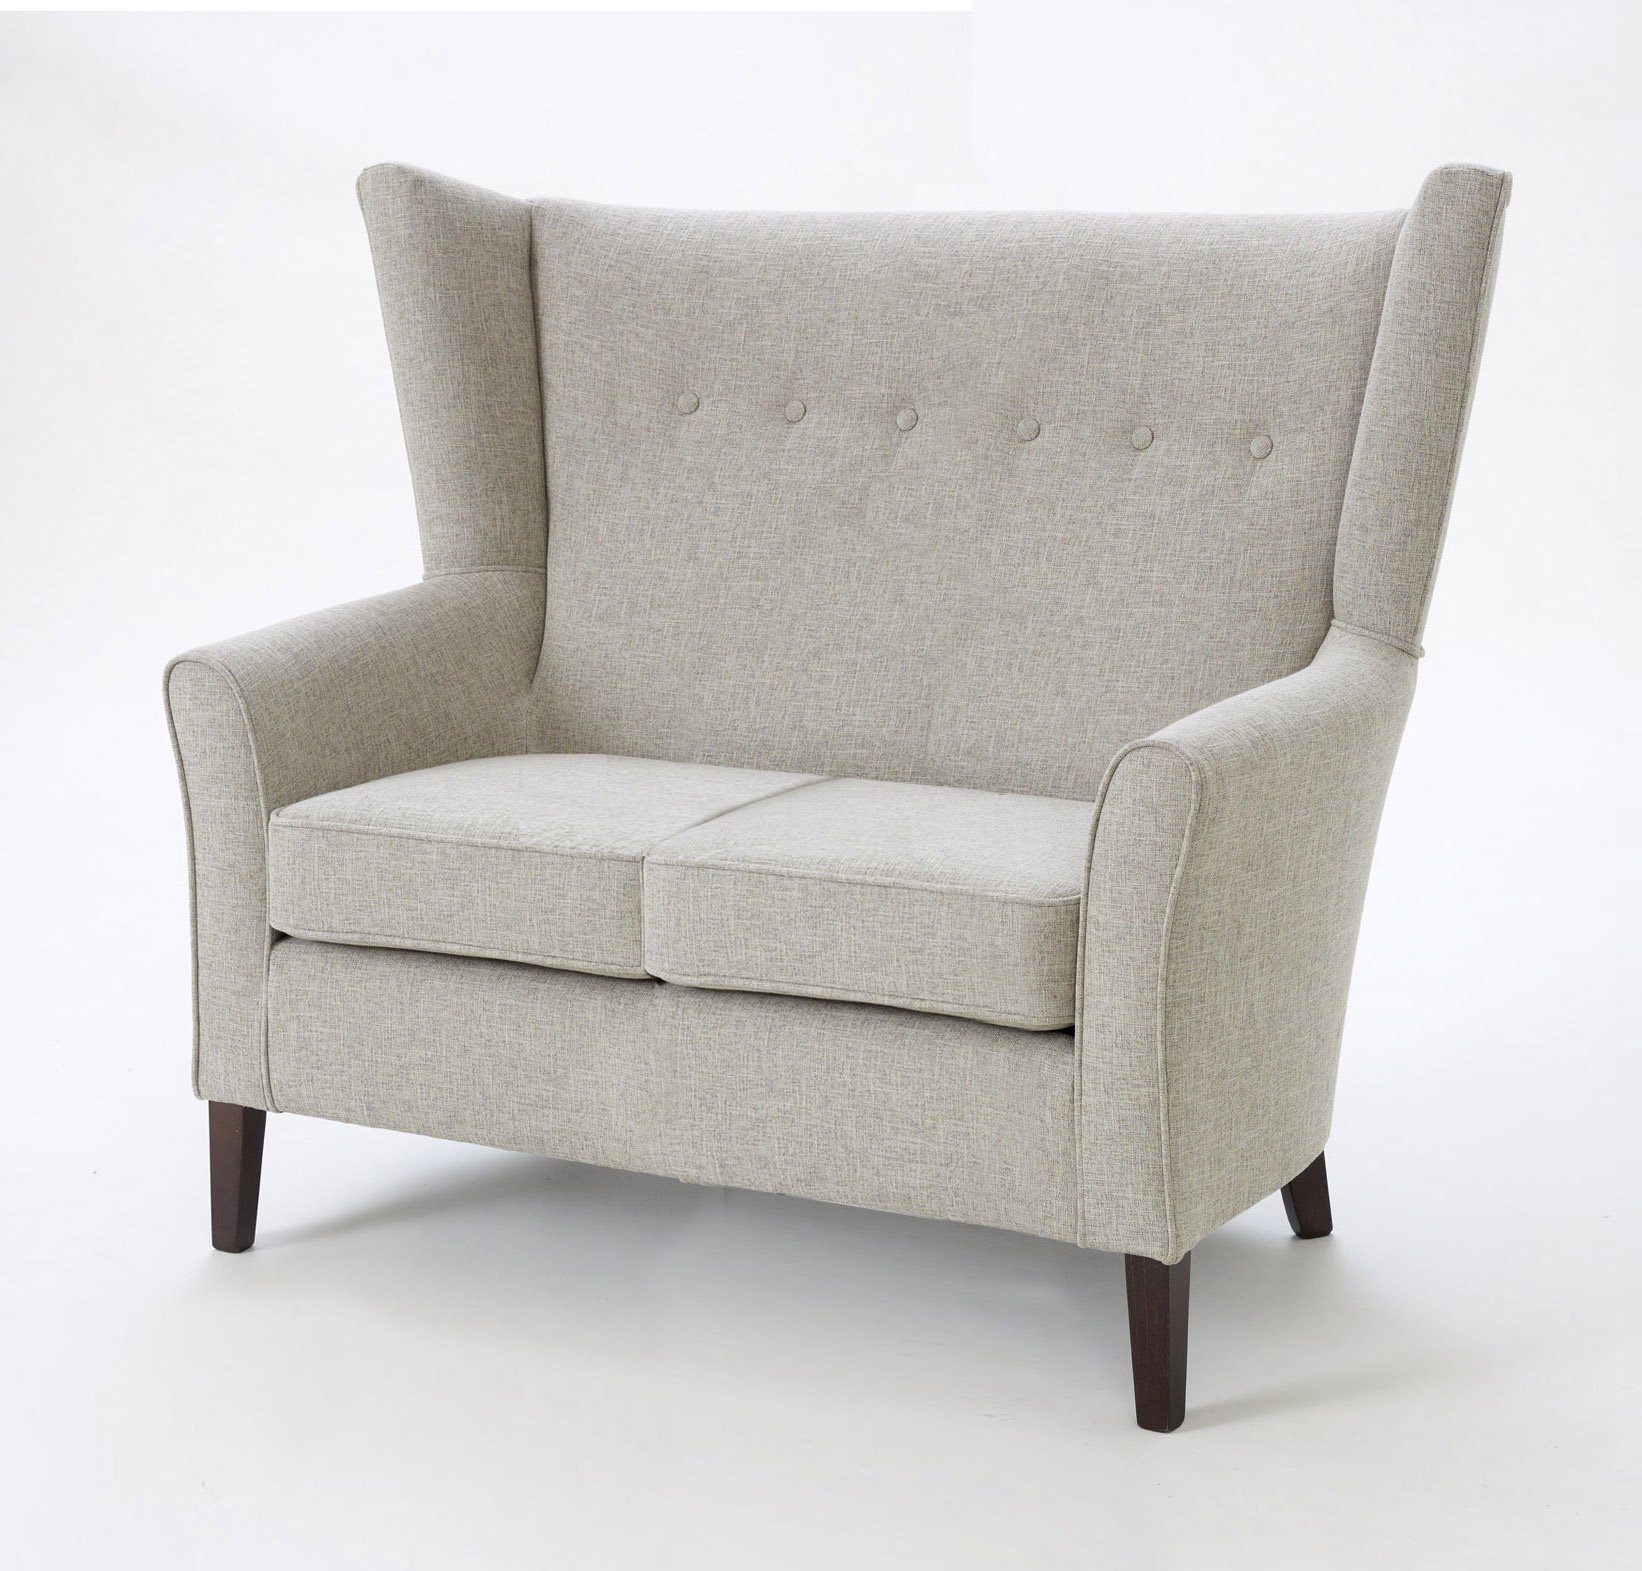  Wing Back Sofa  Chair Review Home Co